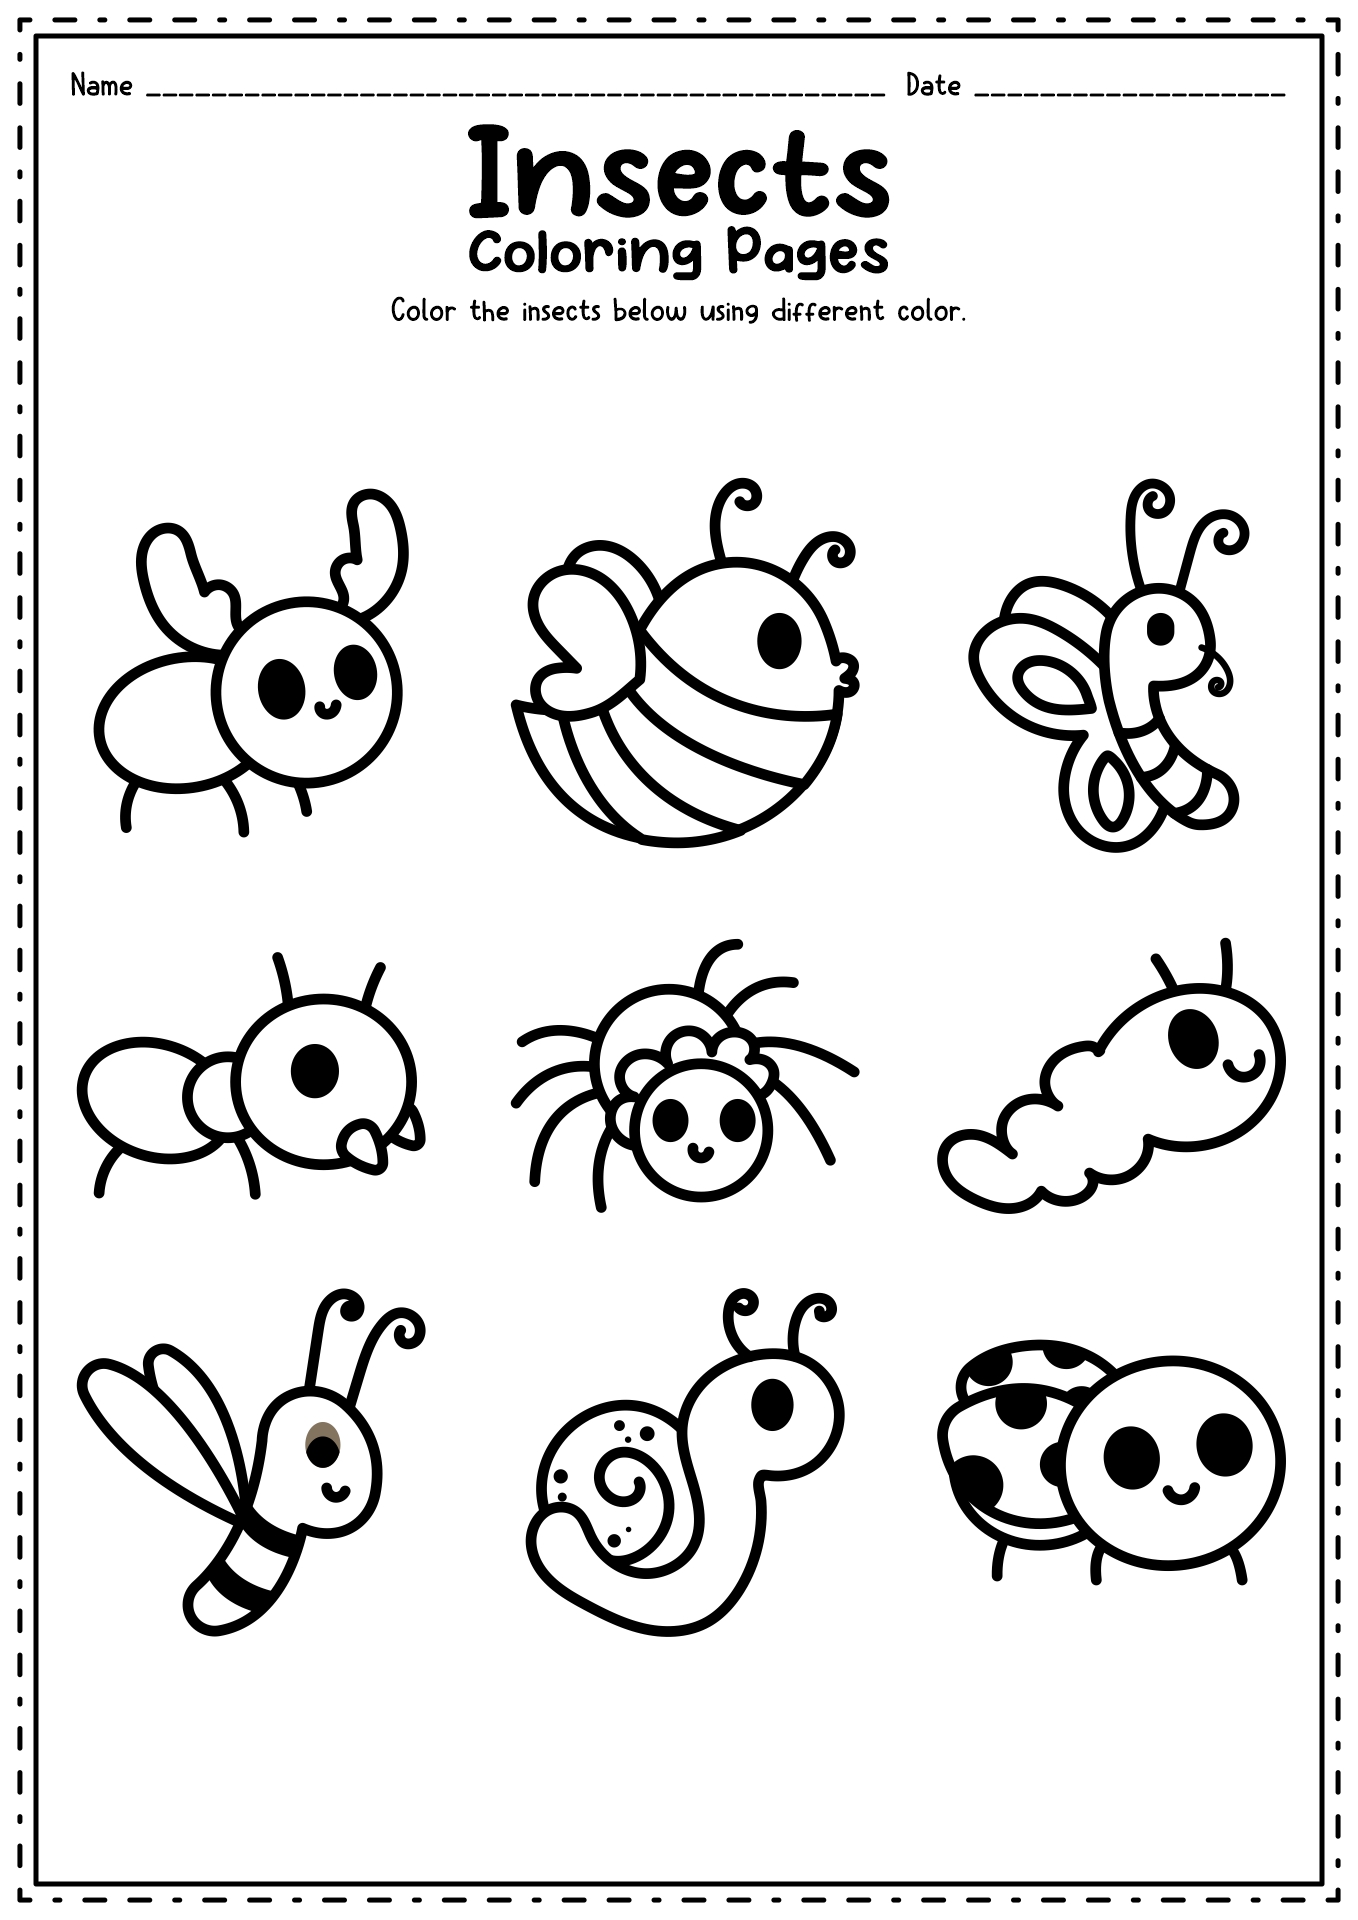 7-best-images-of-kids-bug-and-insects-worksheets-insect-for-kids-to